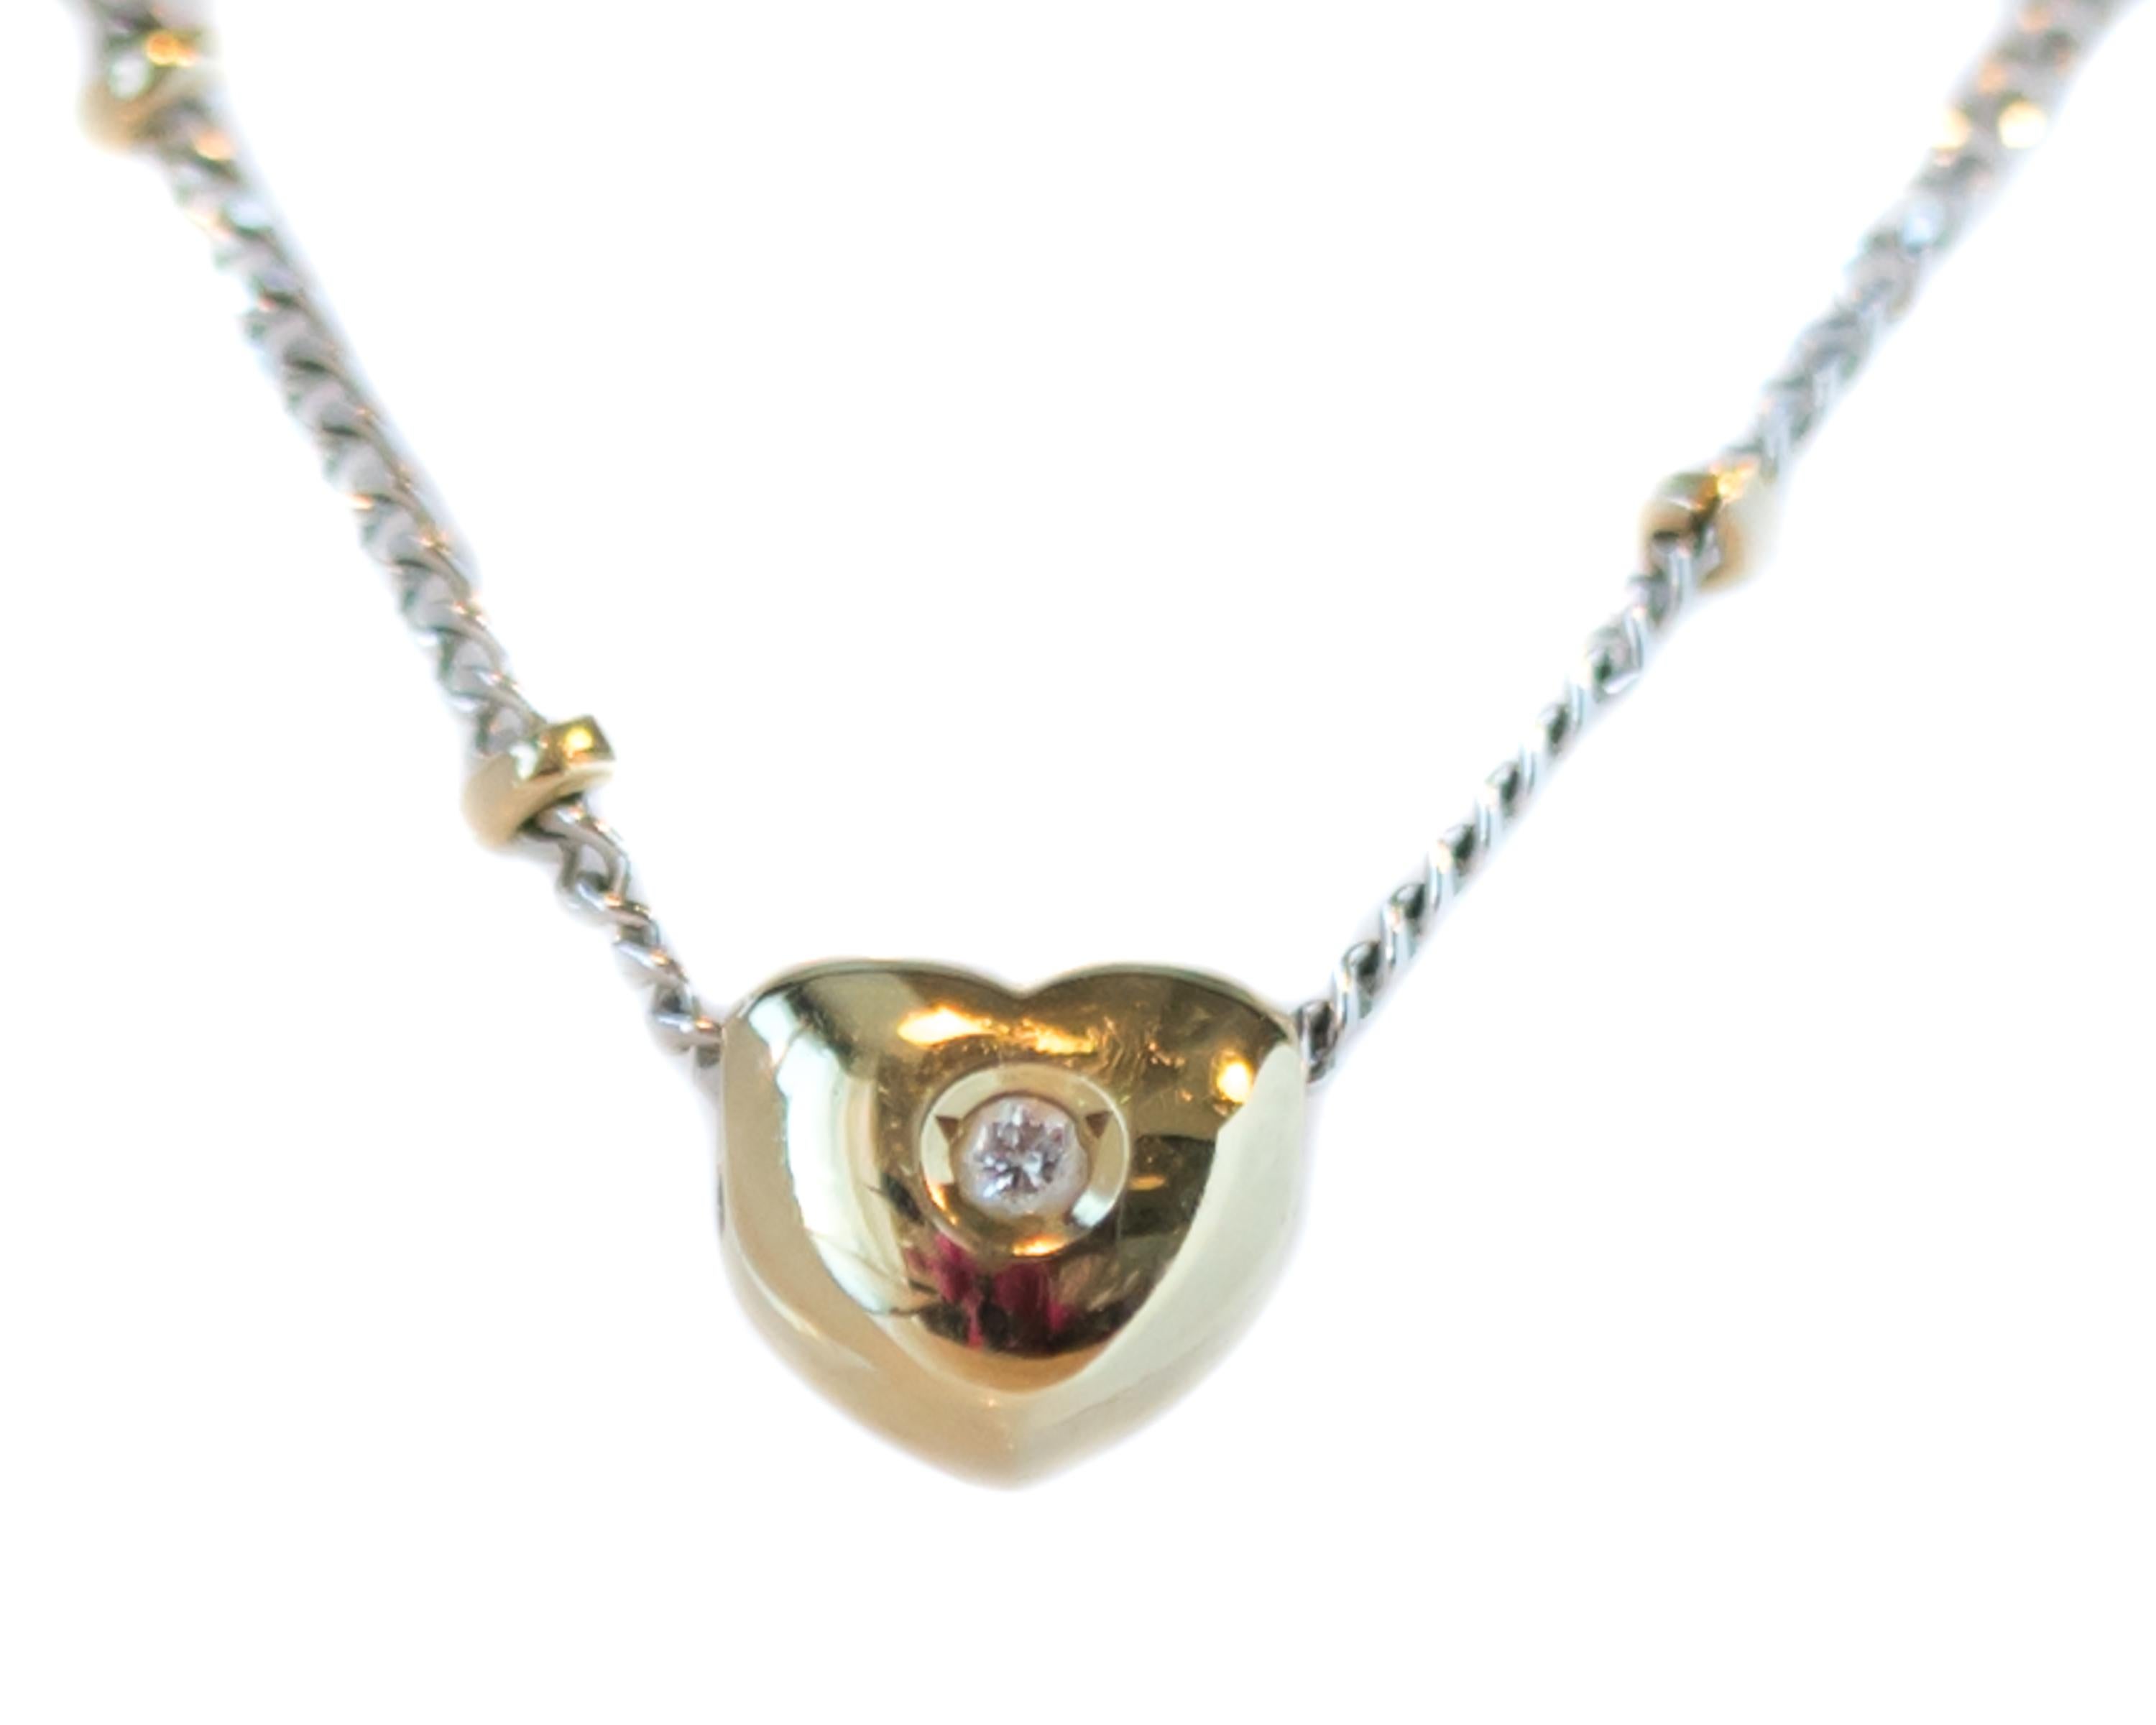 1970s Puffed Heart Necklace with Beaded Chain - 14 Karat Yellow Gold, White Gold

Features:
14 Karat Yellow Gold Floating Puffed Heart
14 Karat White Gold Link Chain Segments alternating with 14 Karat Yellow Gold Fixed Beads
14 Karat Yellow Gold